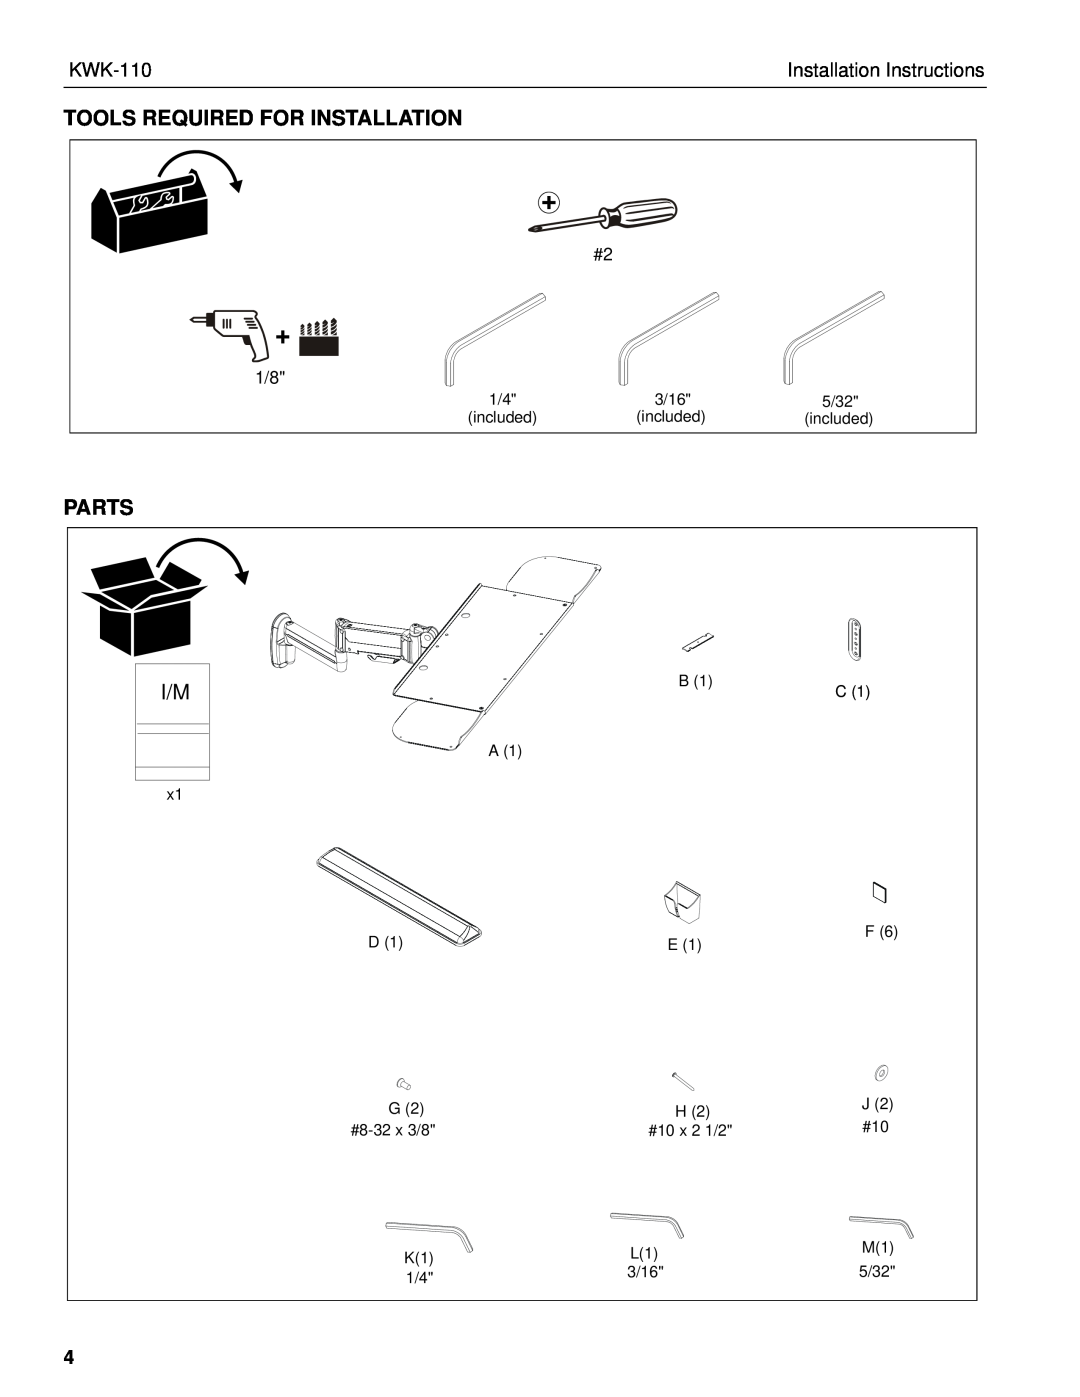 Chief Manufacturing KWK-110 installation instructions Tools Required For Installation, Parts, Installation Instructions 